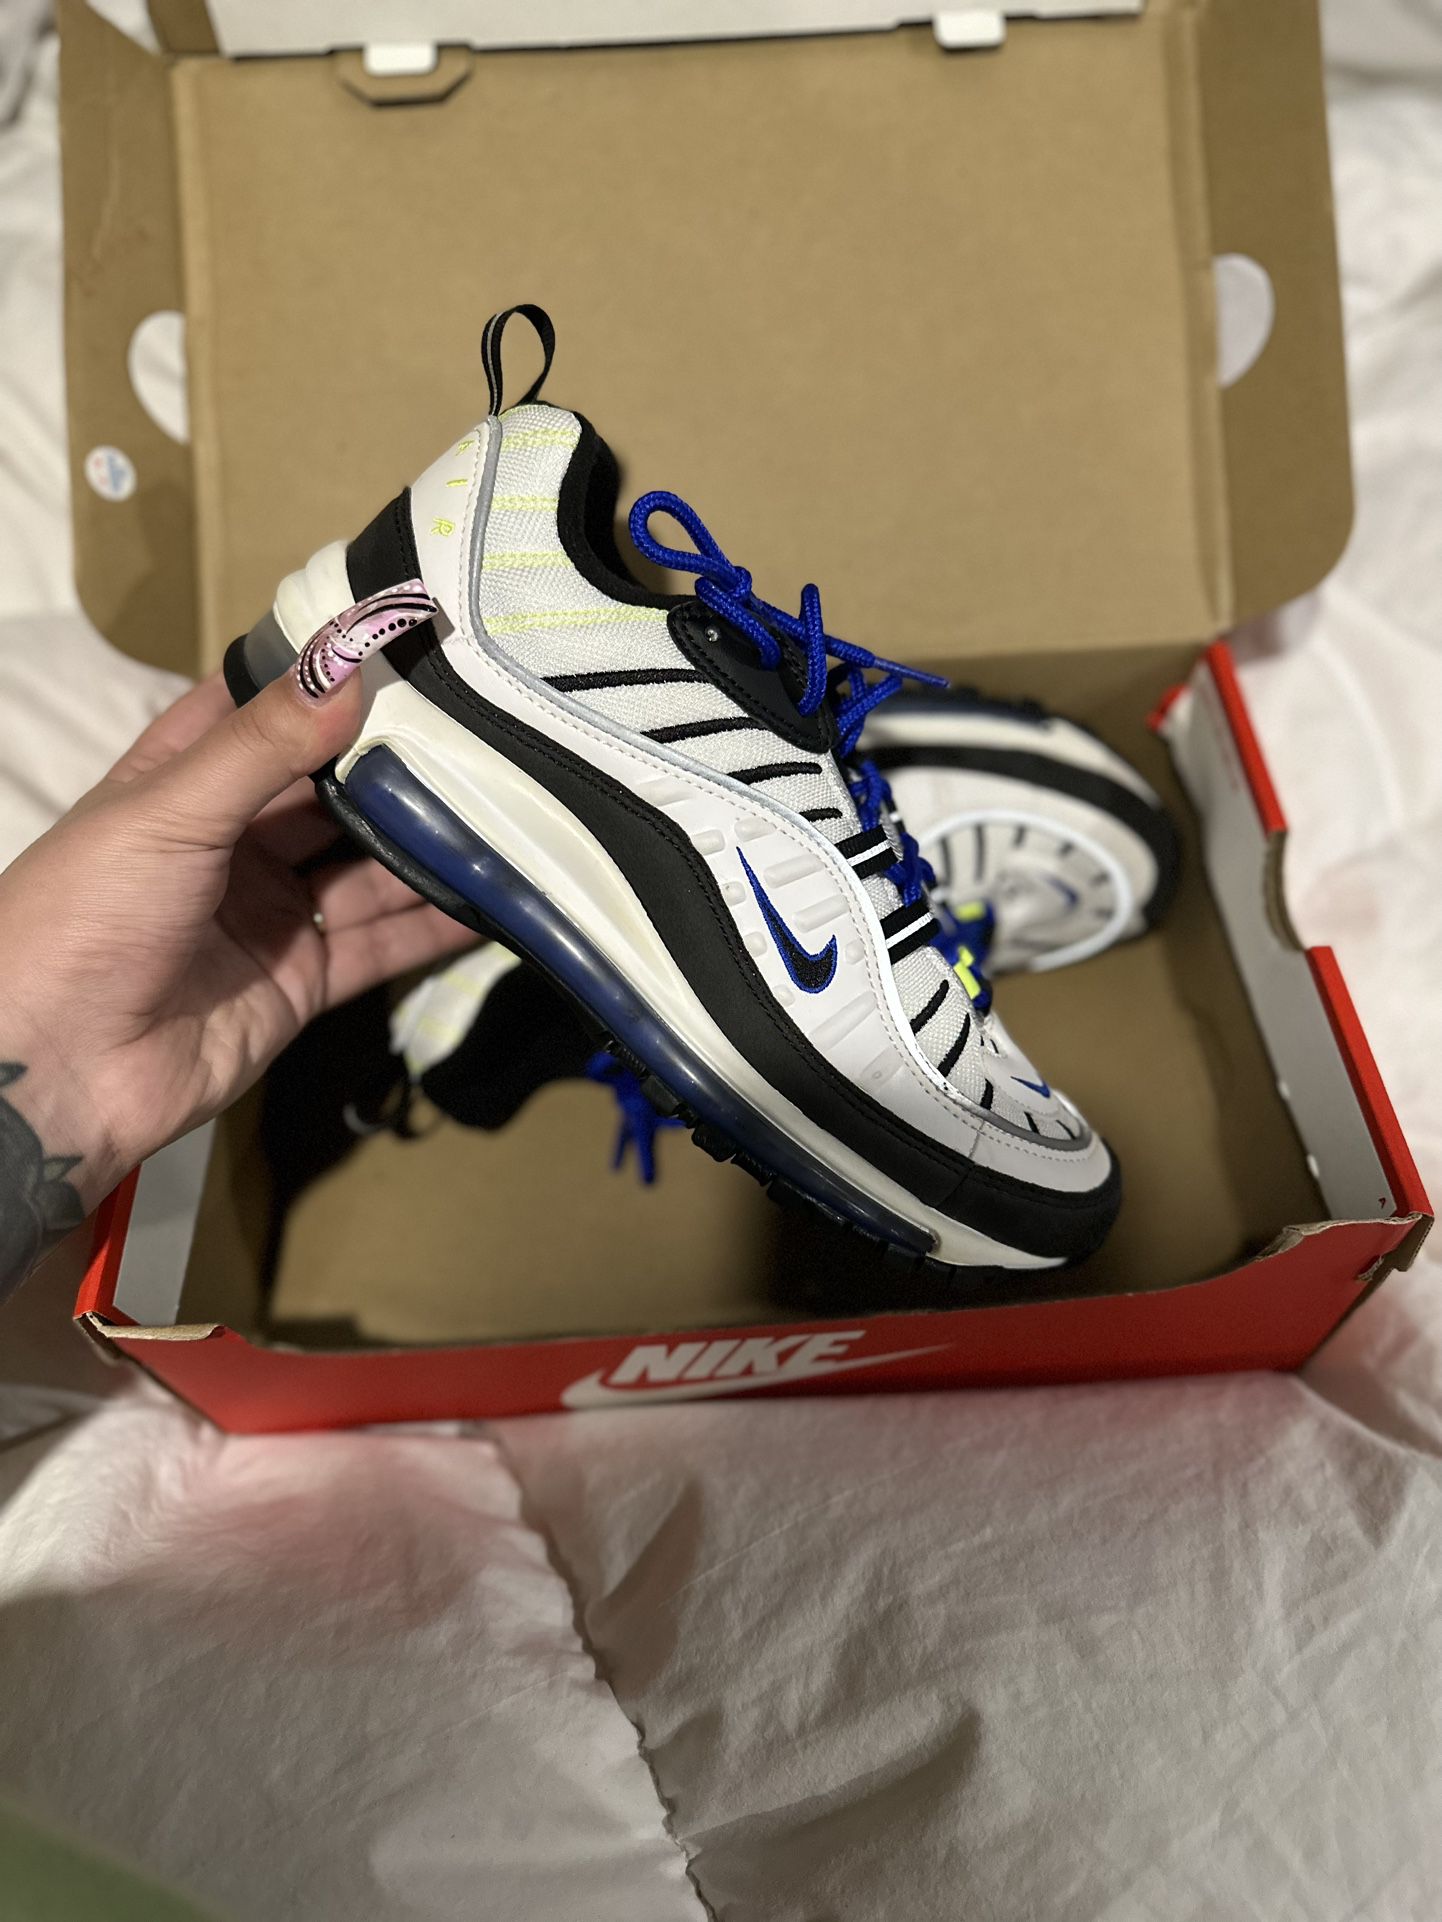 Fraternidad bicapa Jugando ajedrez Nike Air Max 98 White Black Racer Blue for Sale in Queens, NY - OfferUp